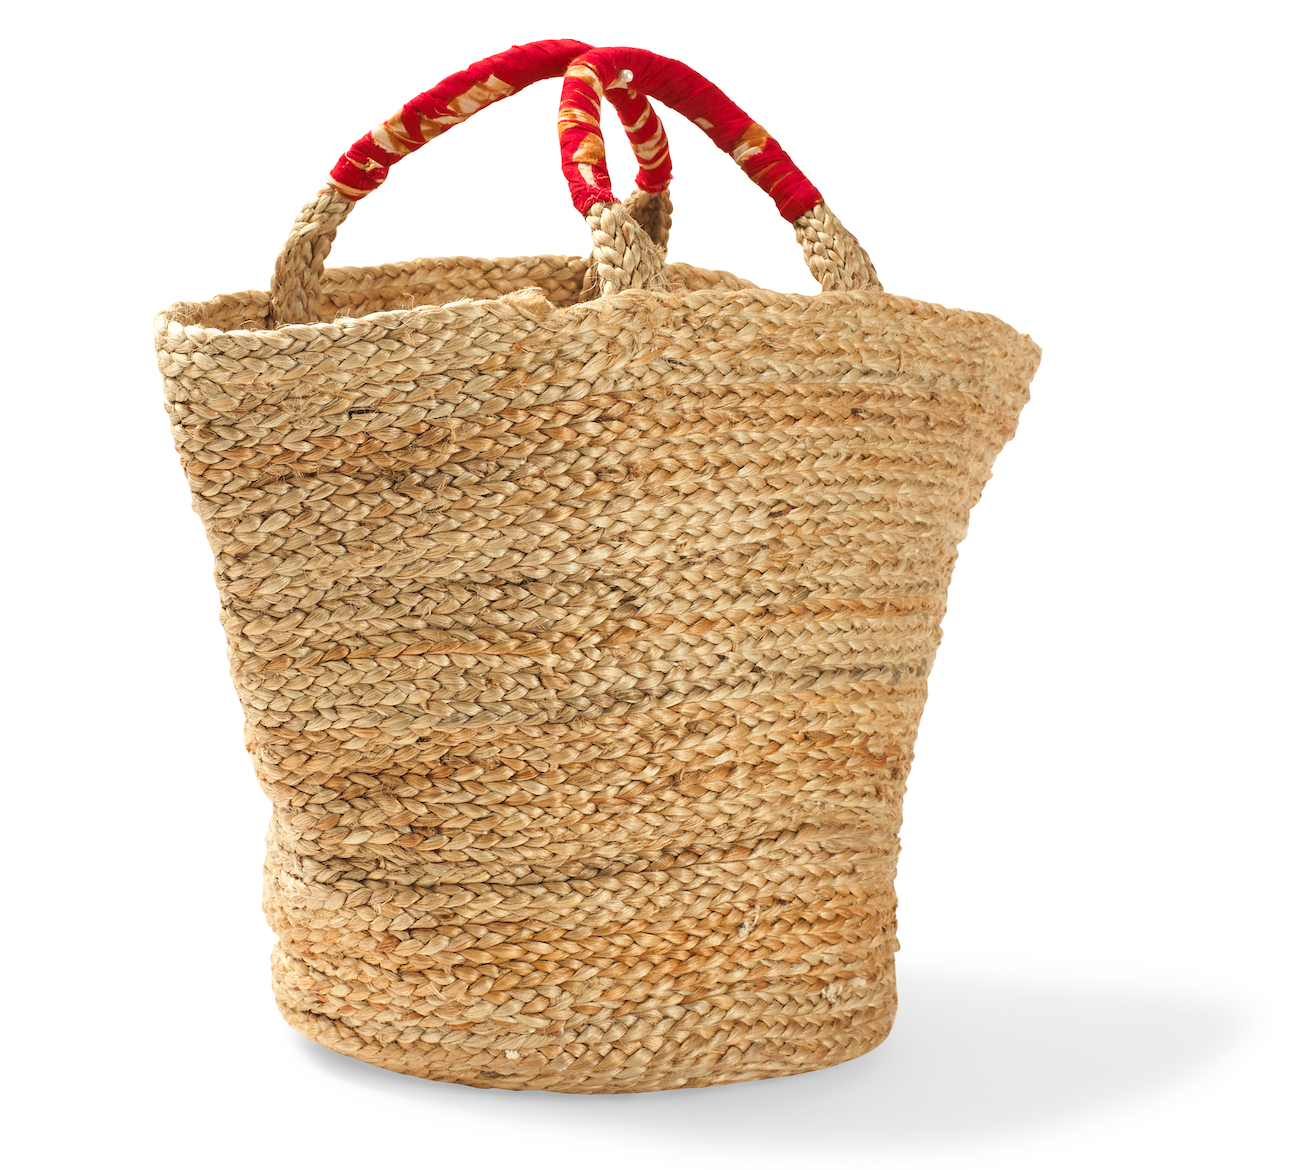 Small Woven Jute Basket with Red Handle